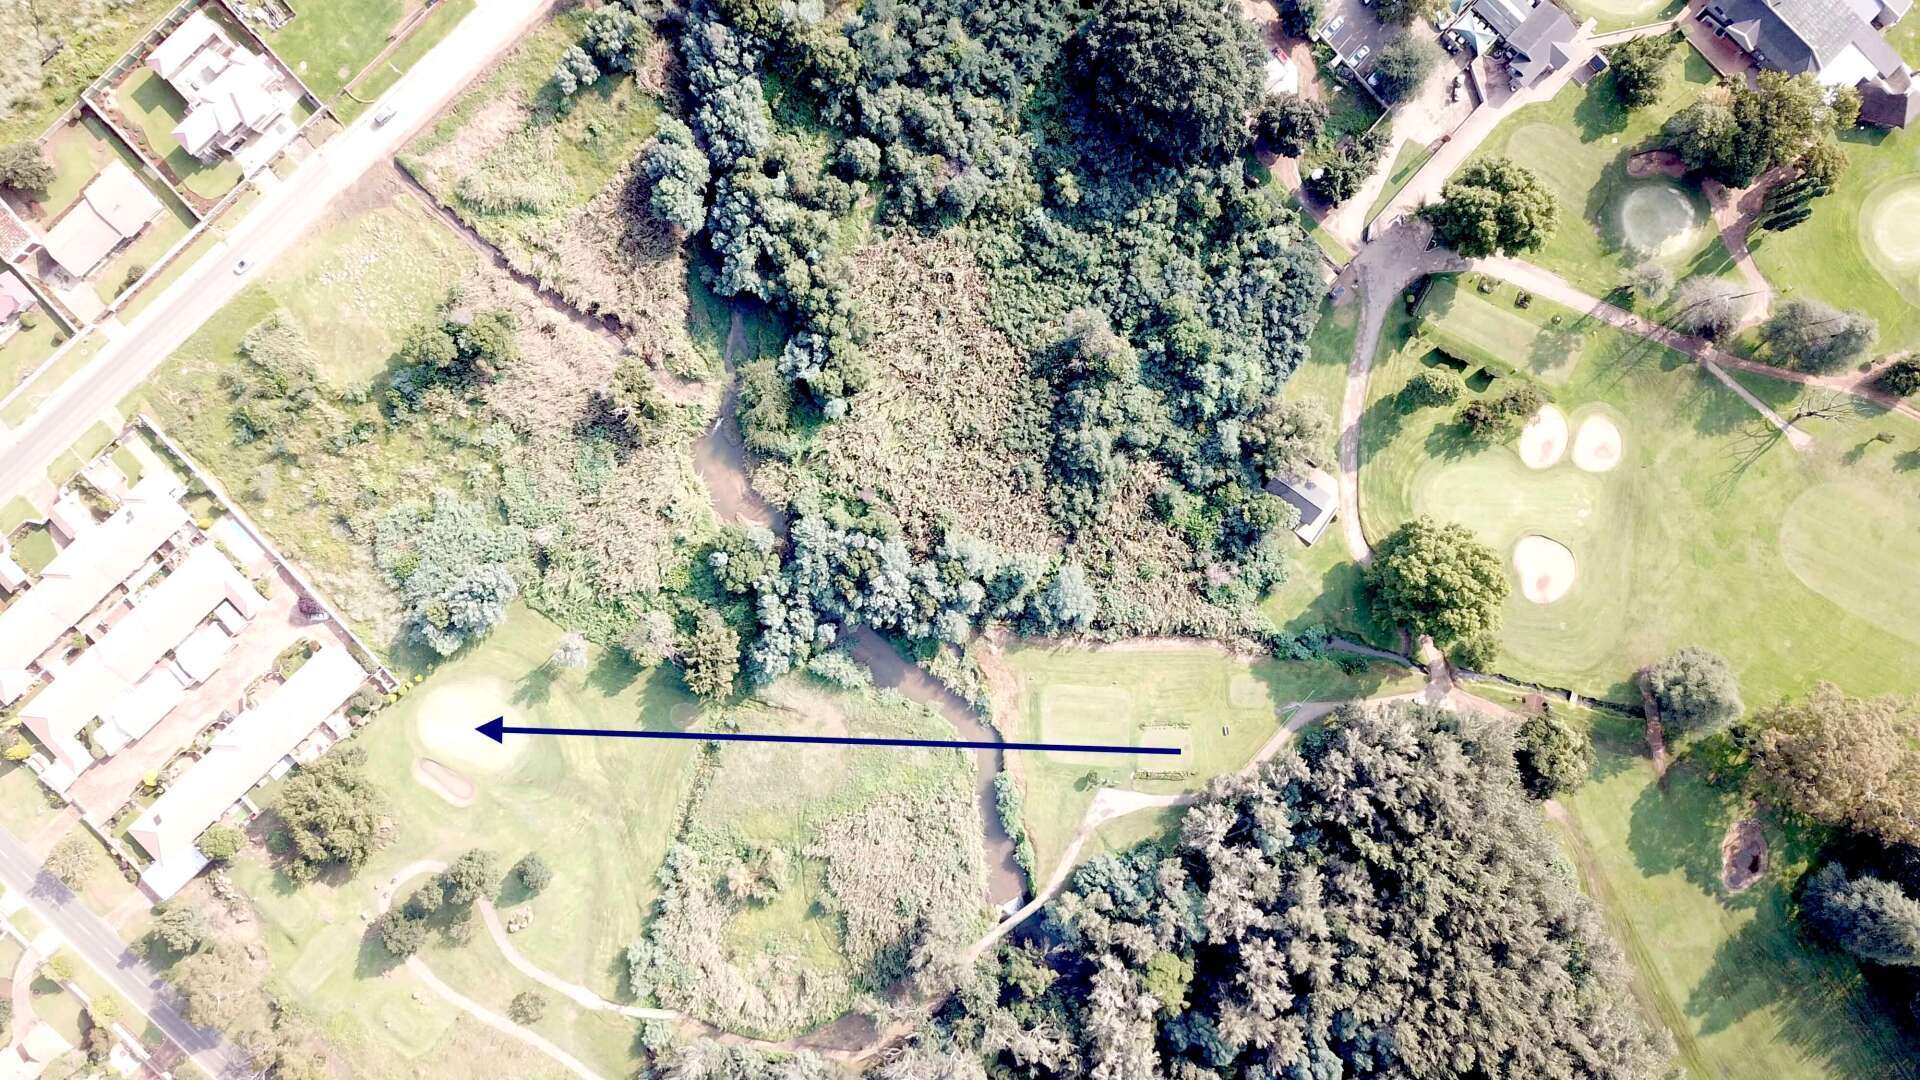 Hole 10 of the course